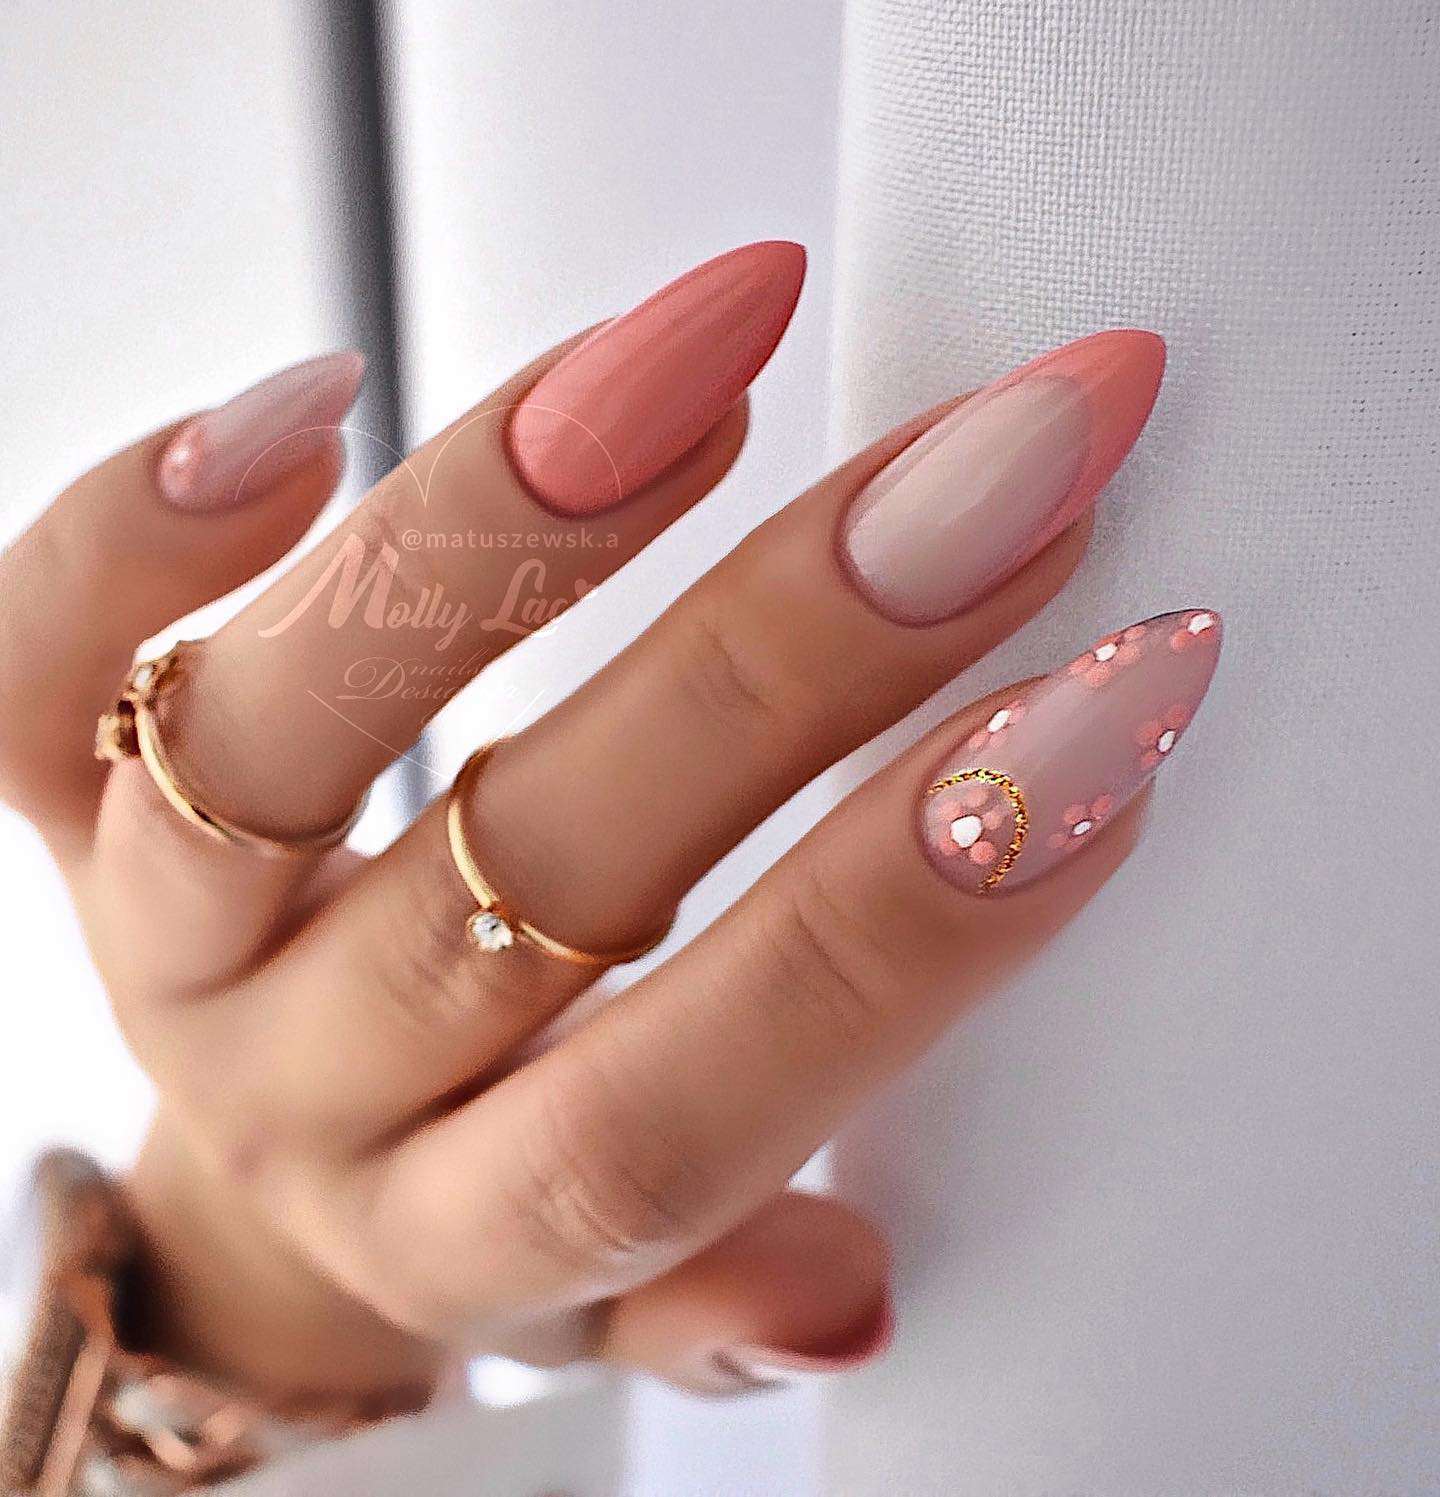 35 Nail Designs For 2022 You’ll Want To Try Immediately images 33